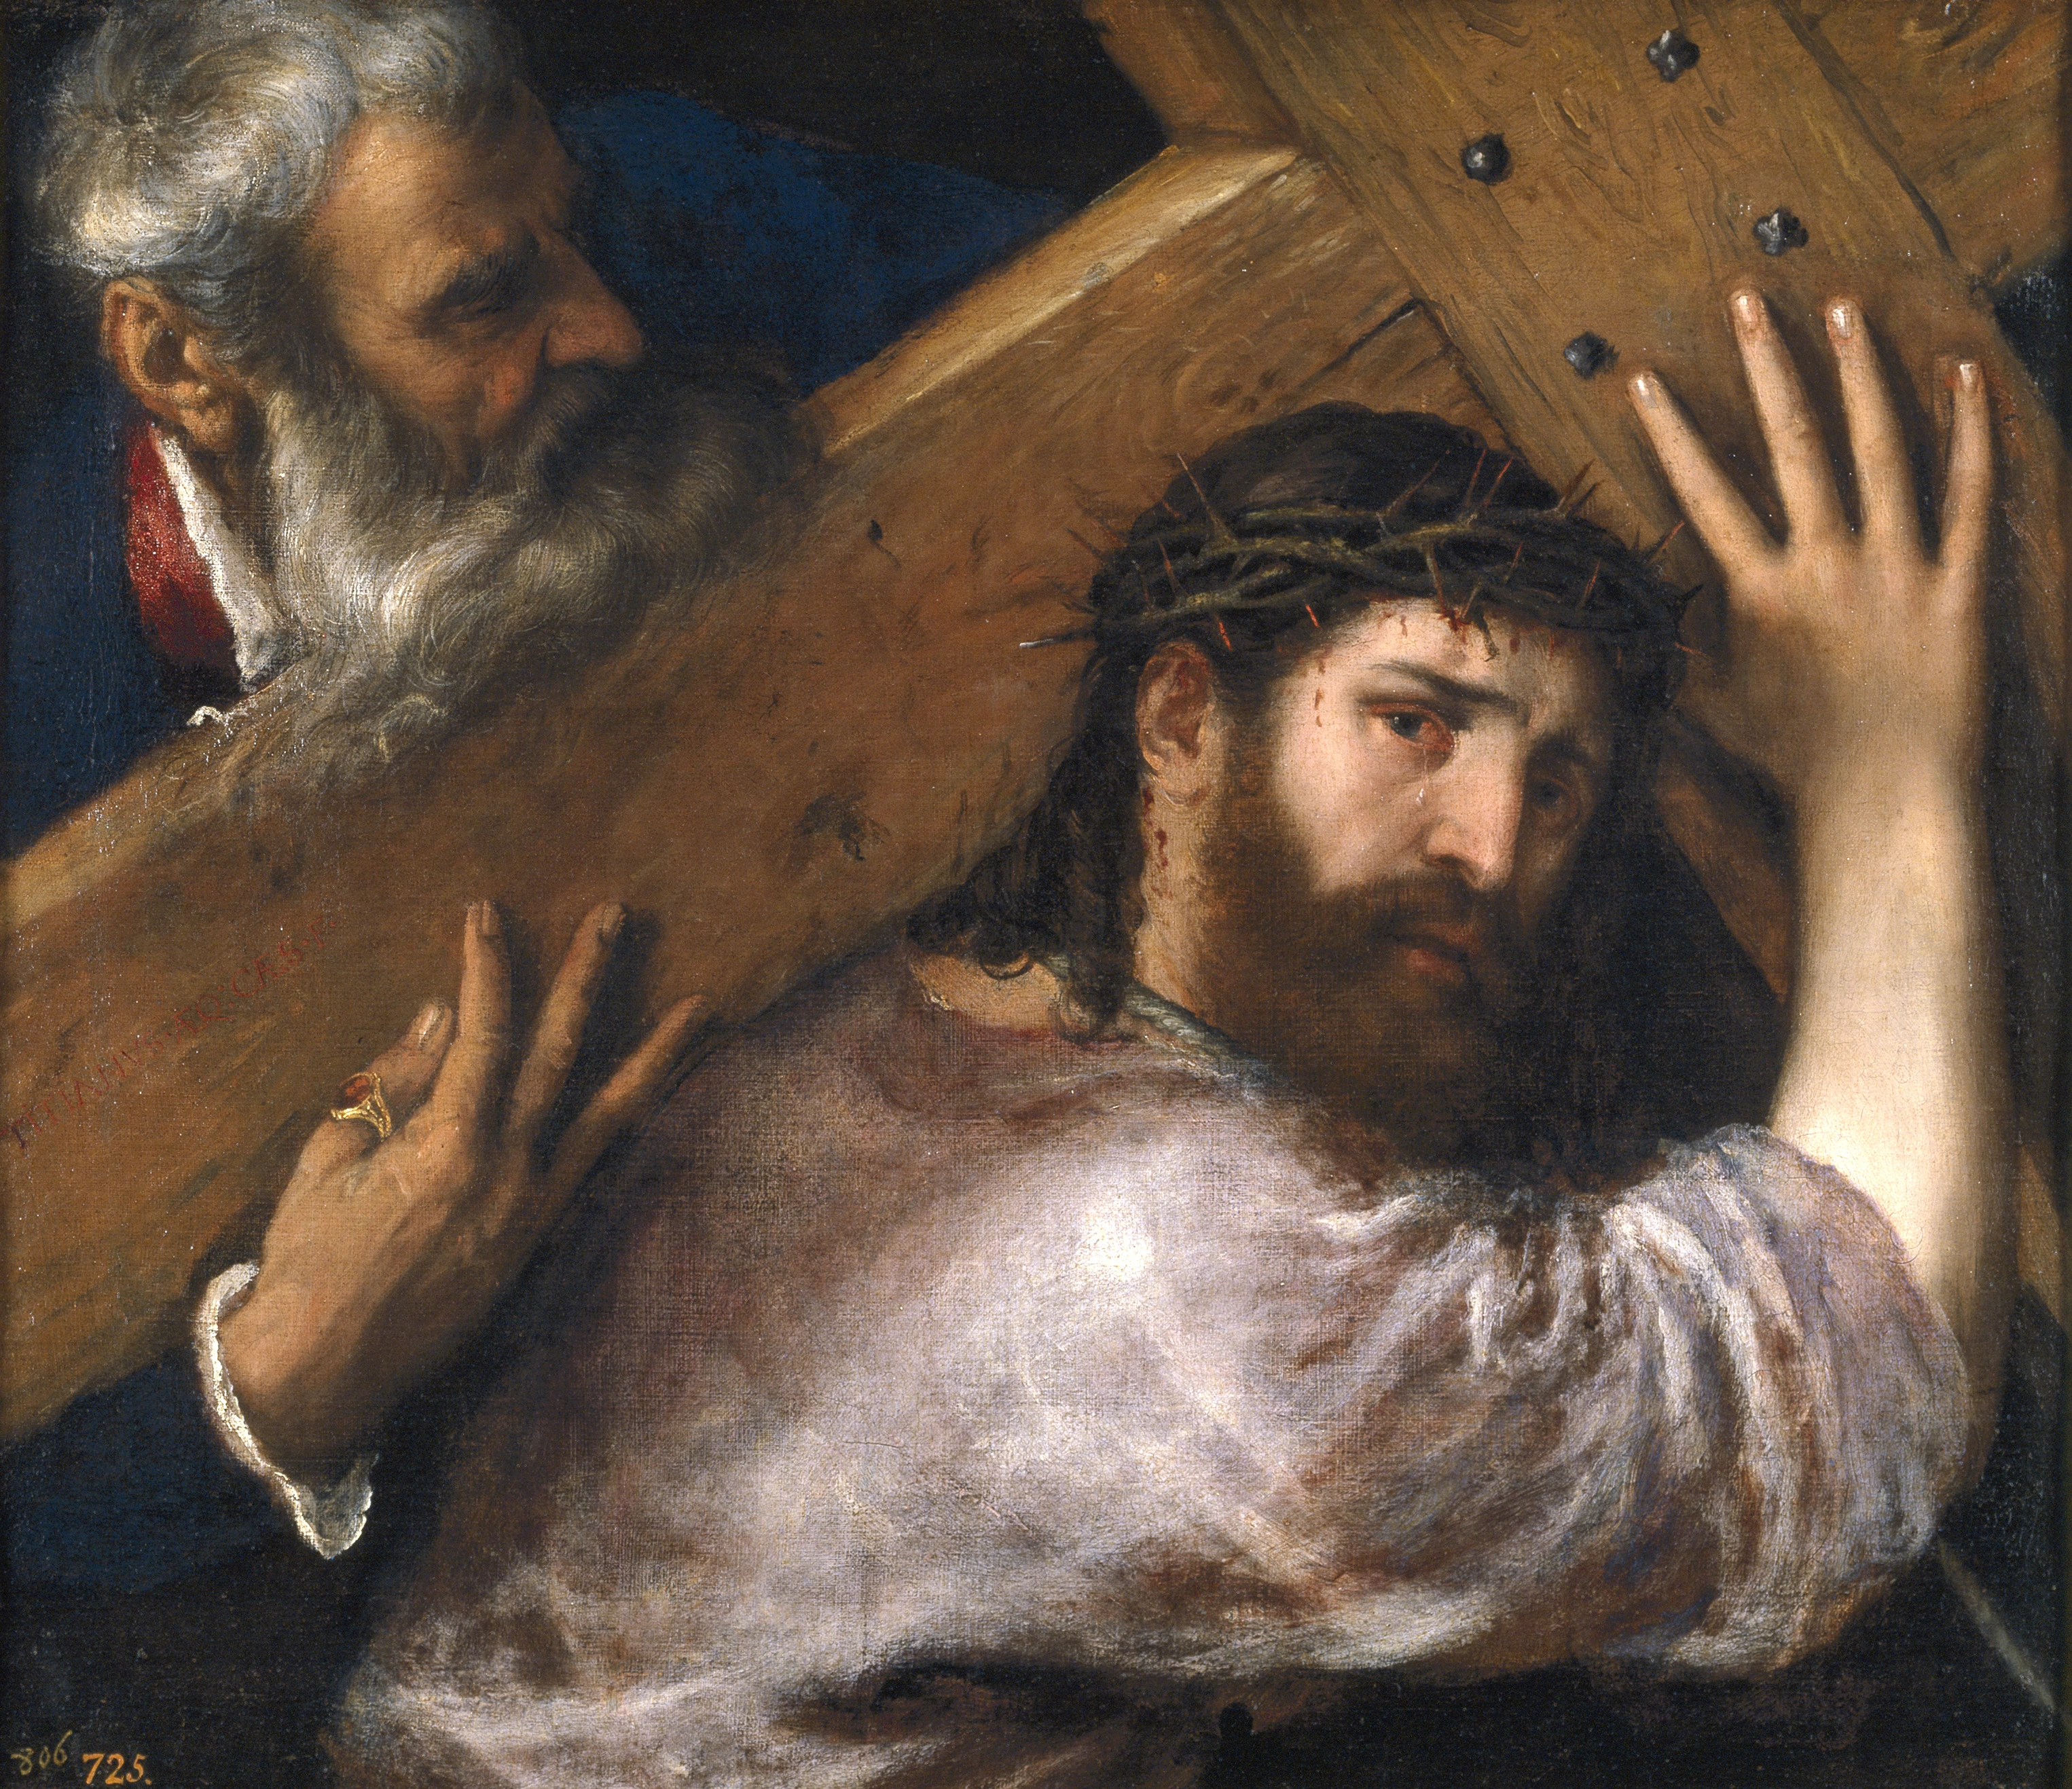 Christ Carrying the Cross, Titian